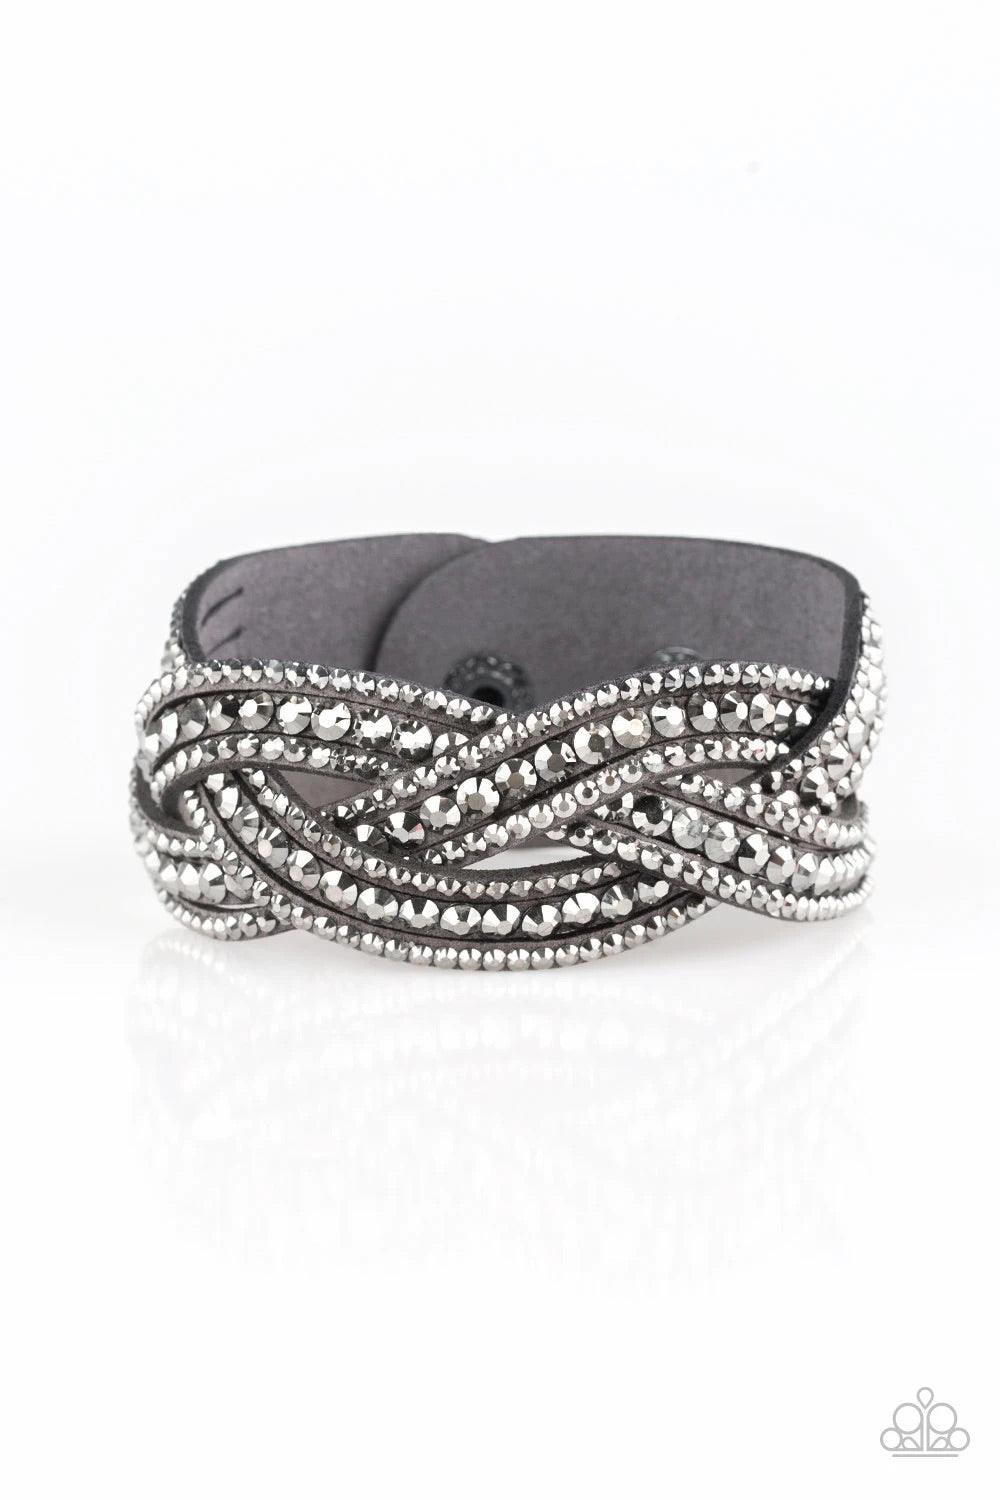 Paparazzi Accessories Bring on the Bling - Silver 2 Varying in size, glittery hematite rhinestones are encrusted along interwoven gray suede bands, creating blinding shimmer across the wrist. Features an adjustable snap closure. Sold as one individual bra